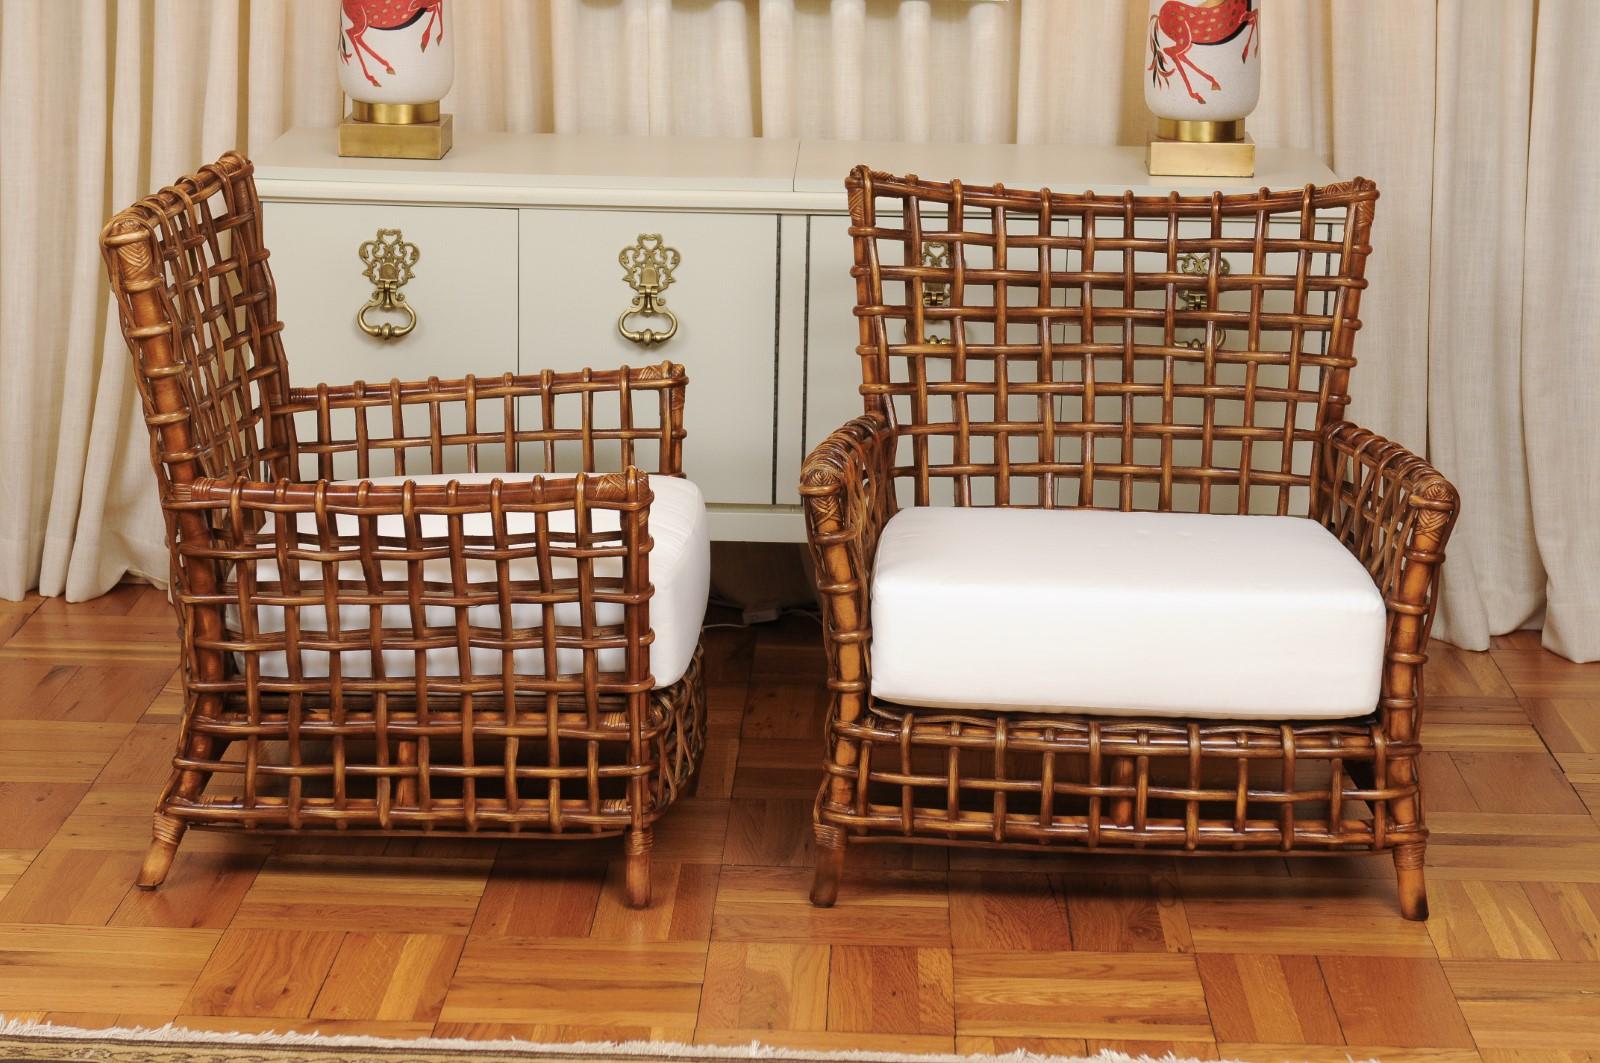 American Fabulous Pair of Caramel Rattan and Cane Club Chairs - 2 Pair Available For Sale